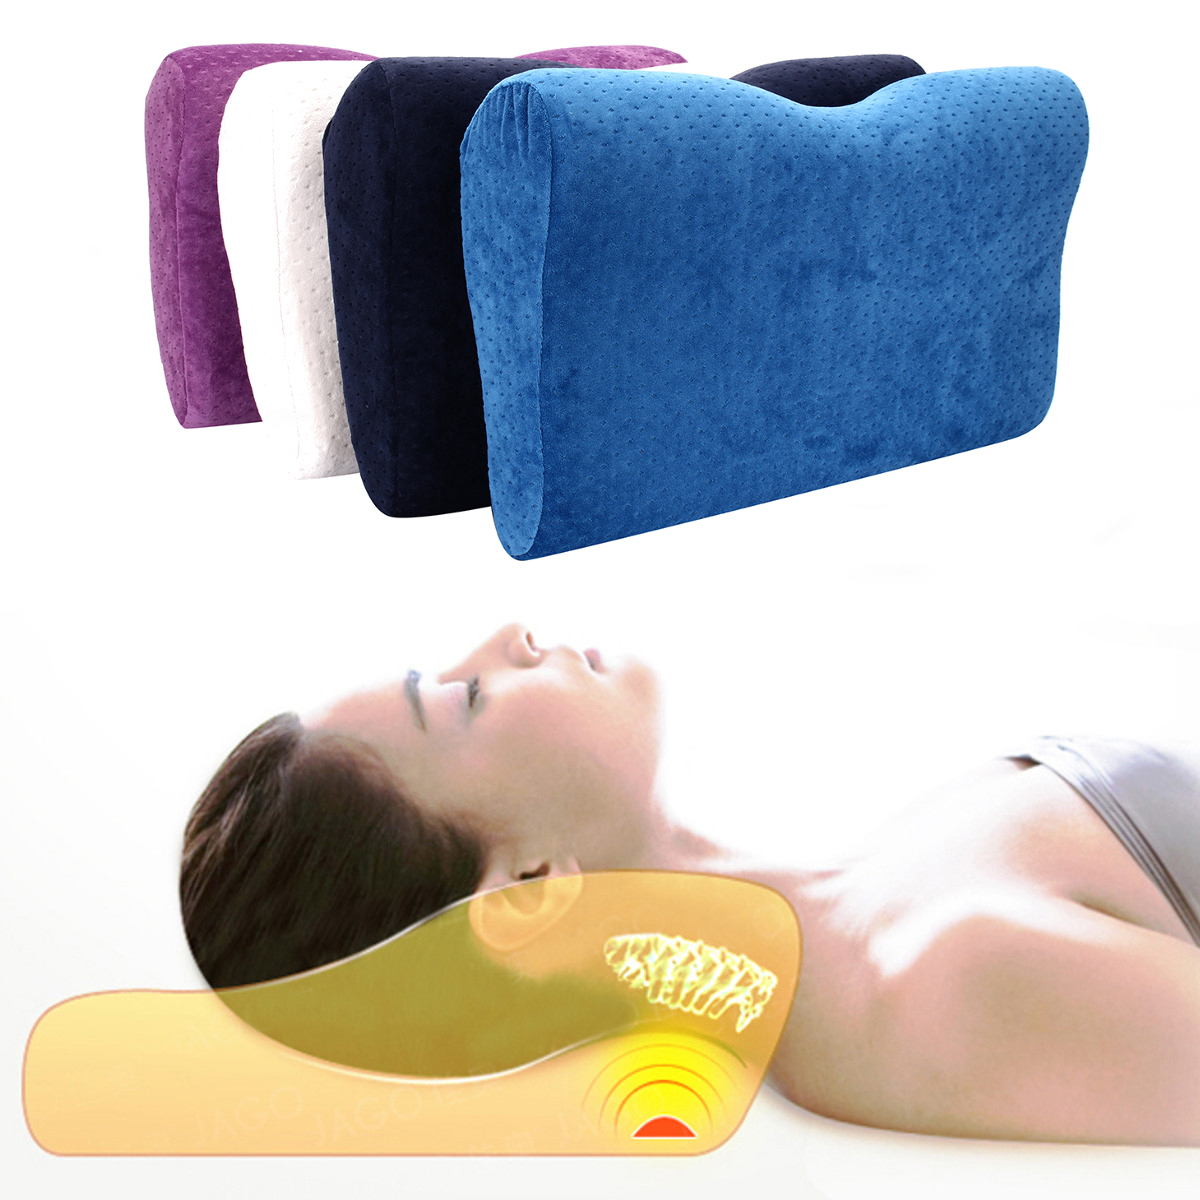 

Comfortable Rebound Memory Foam Cervical Orthopedic Bed Neck Pain Relief Pillow